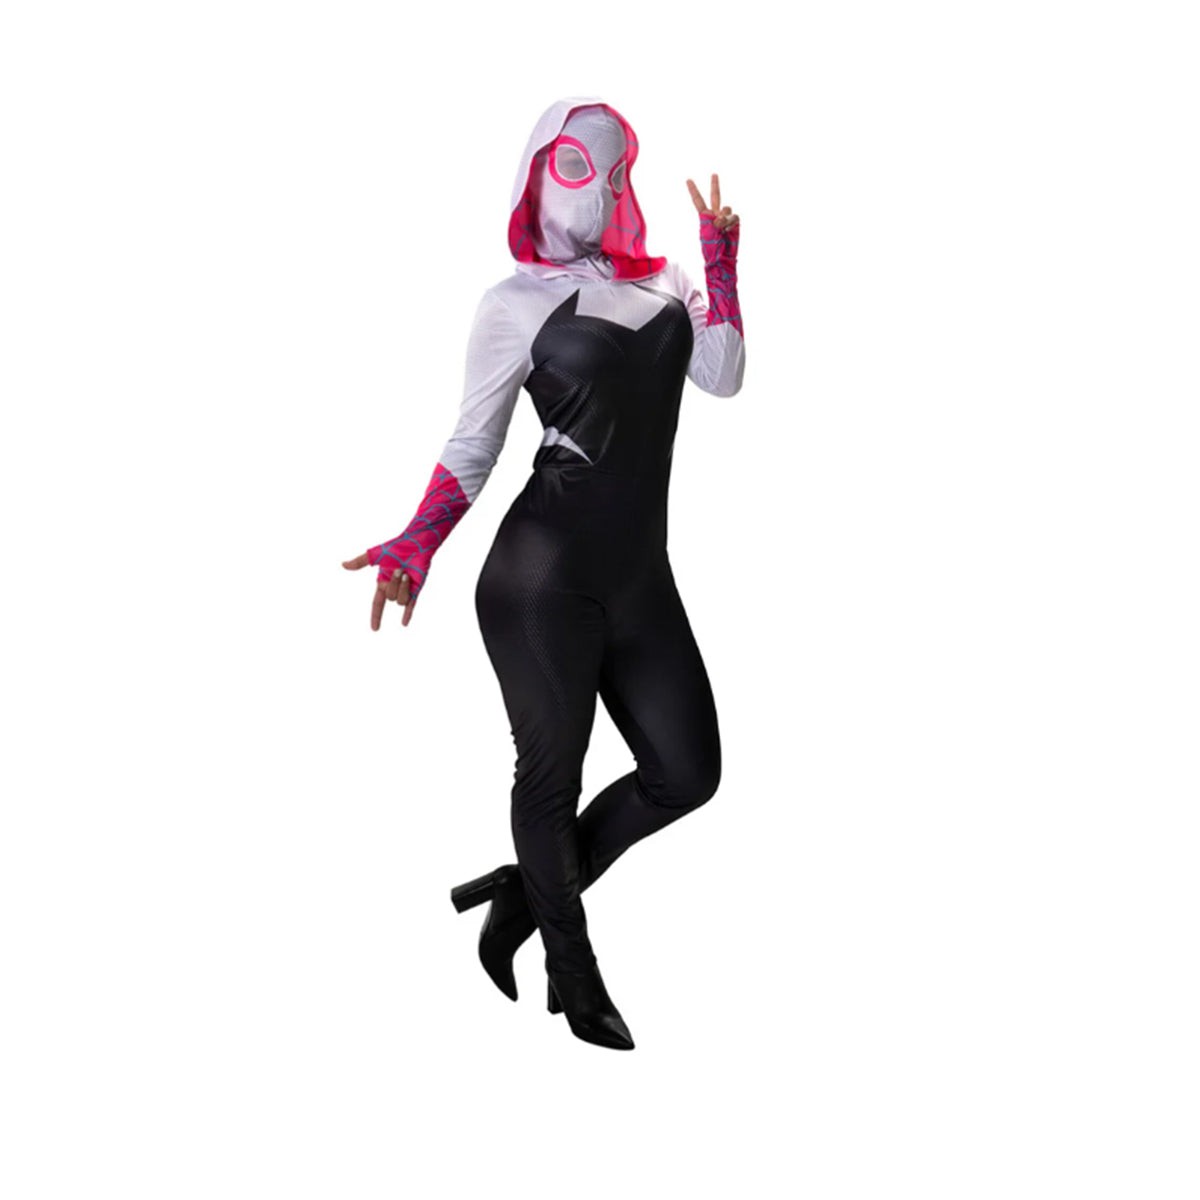 KROEGER Costumes Marvel Avengers Ghost Spider Gwen Stacy Costume for Adults, Black and Pink Jumpsuit